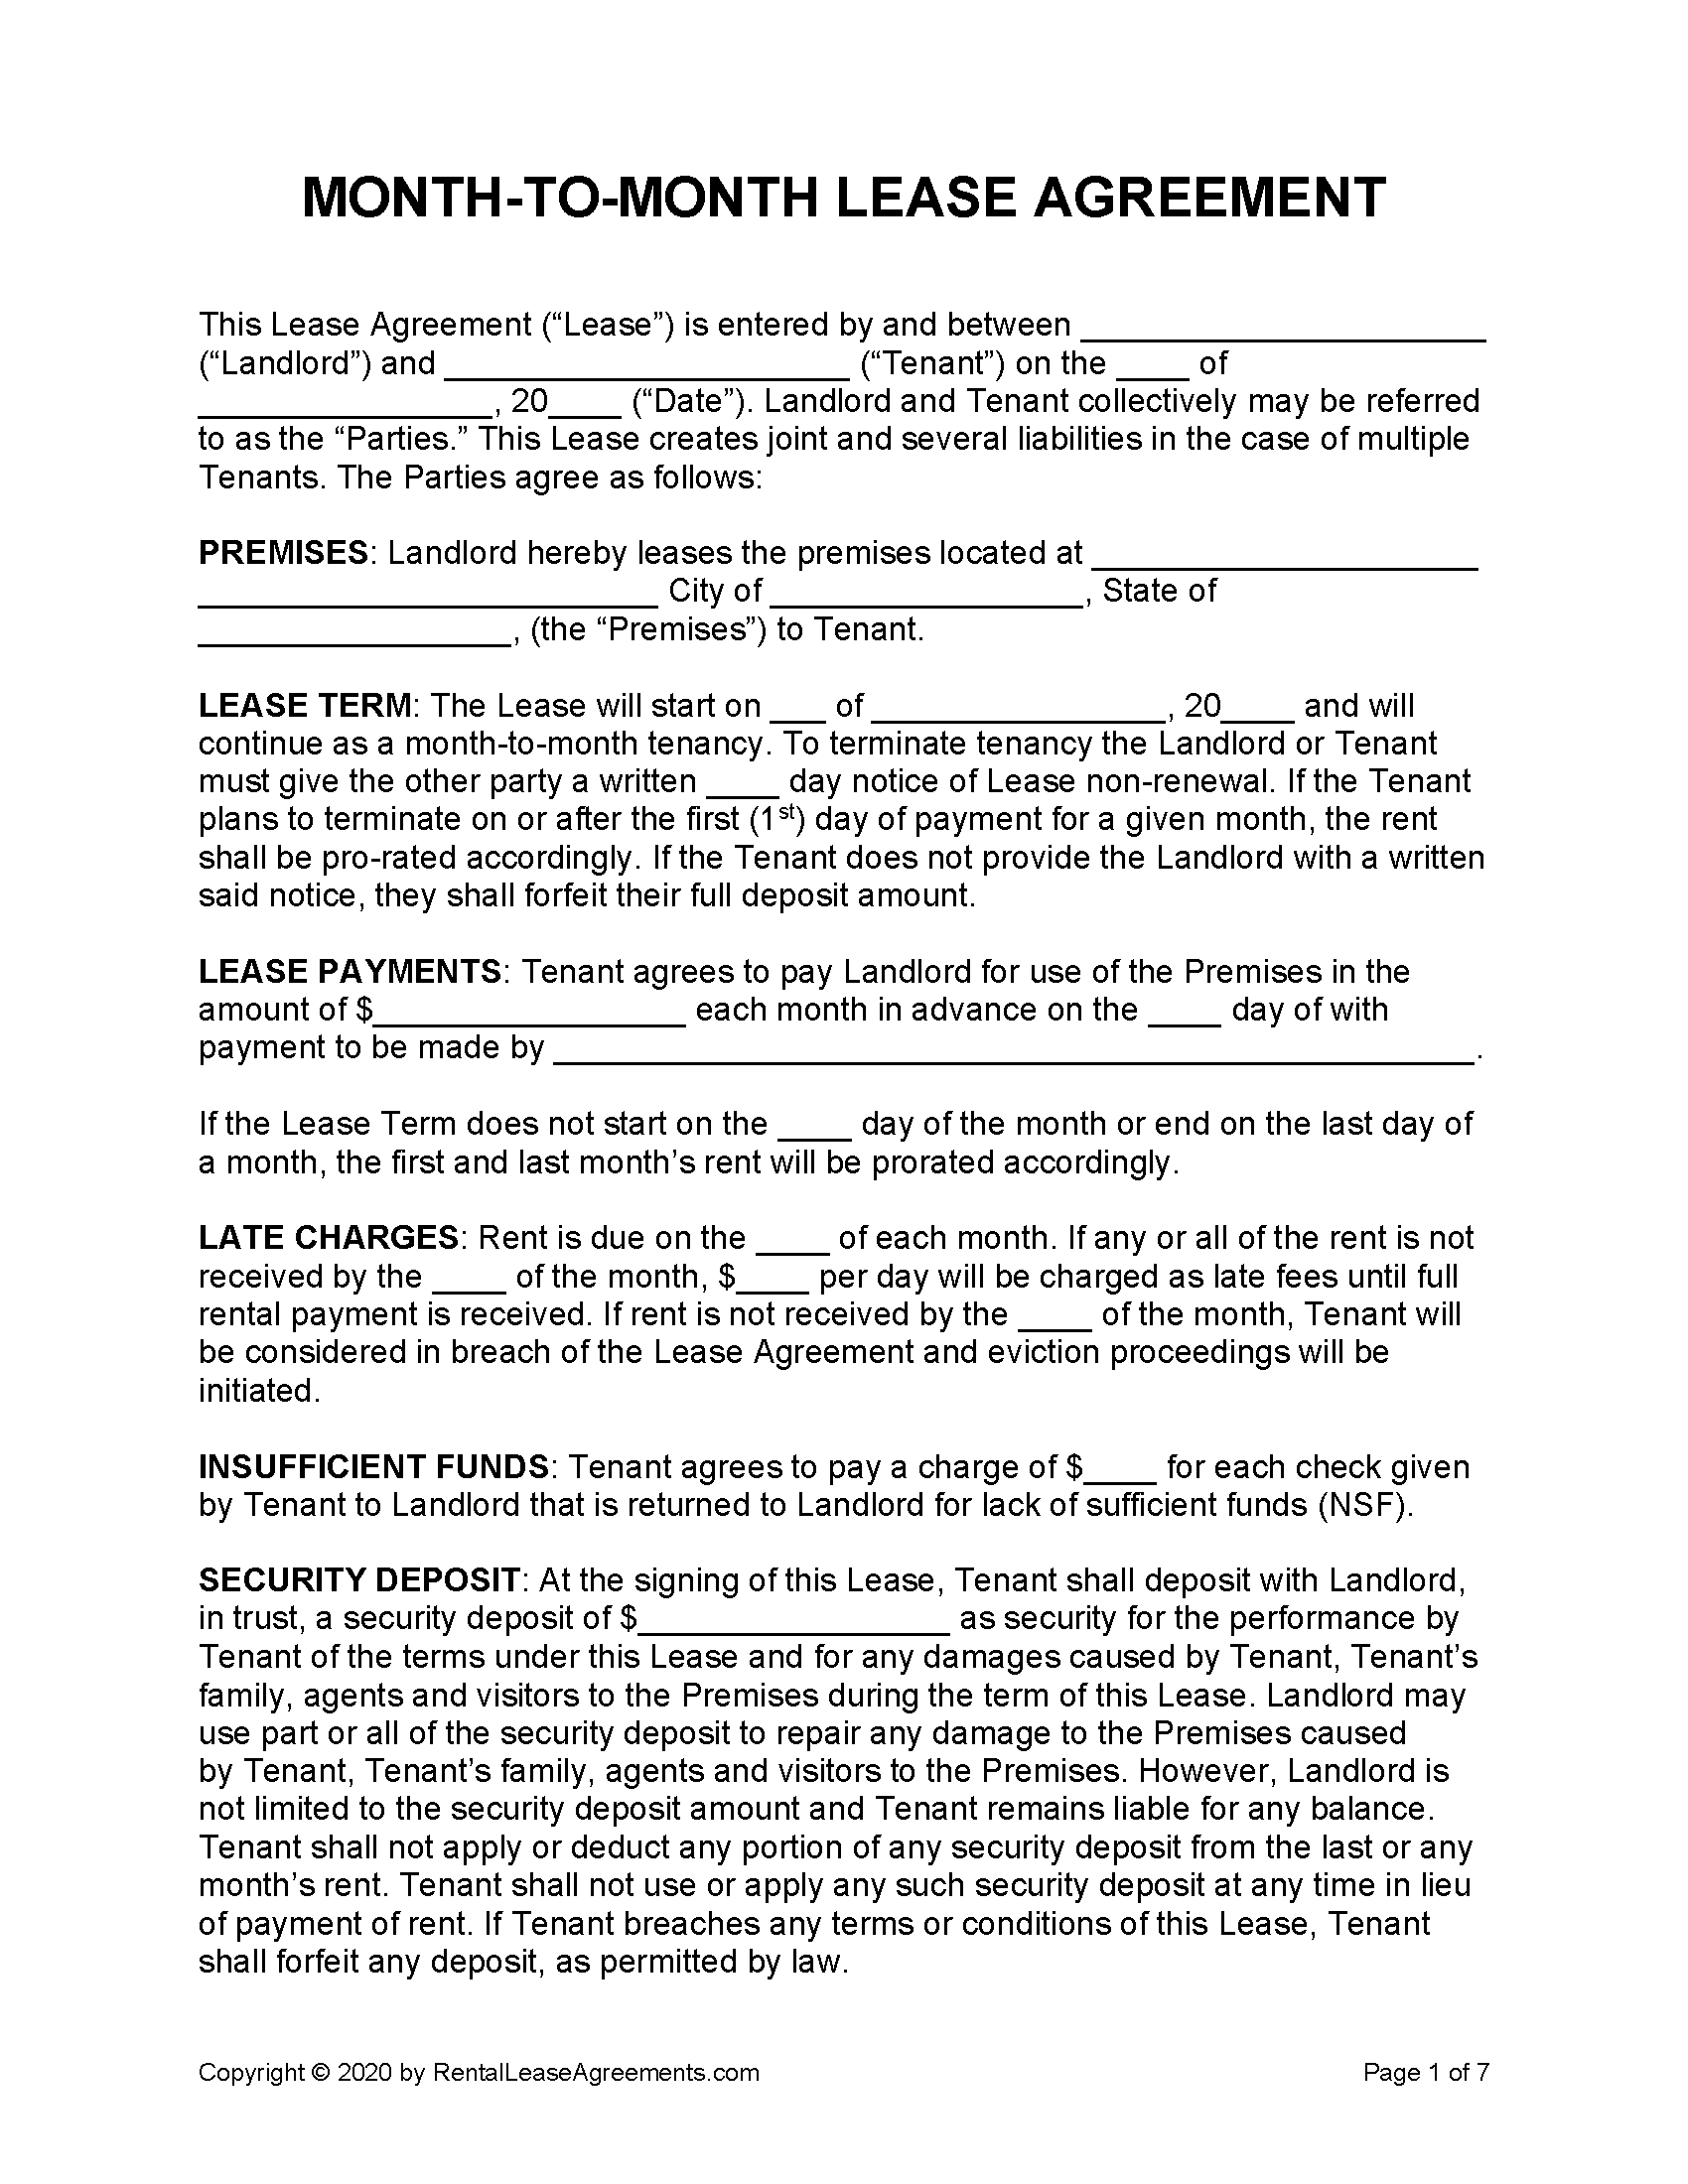 free month to month rental agreement pdf word